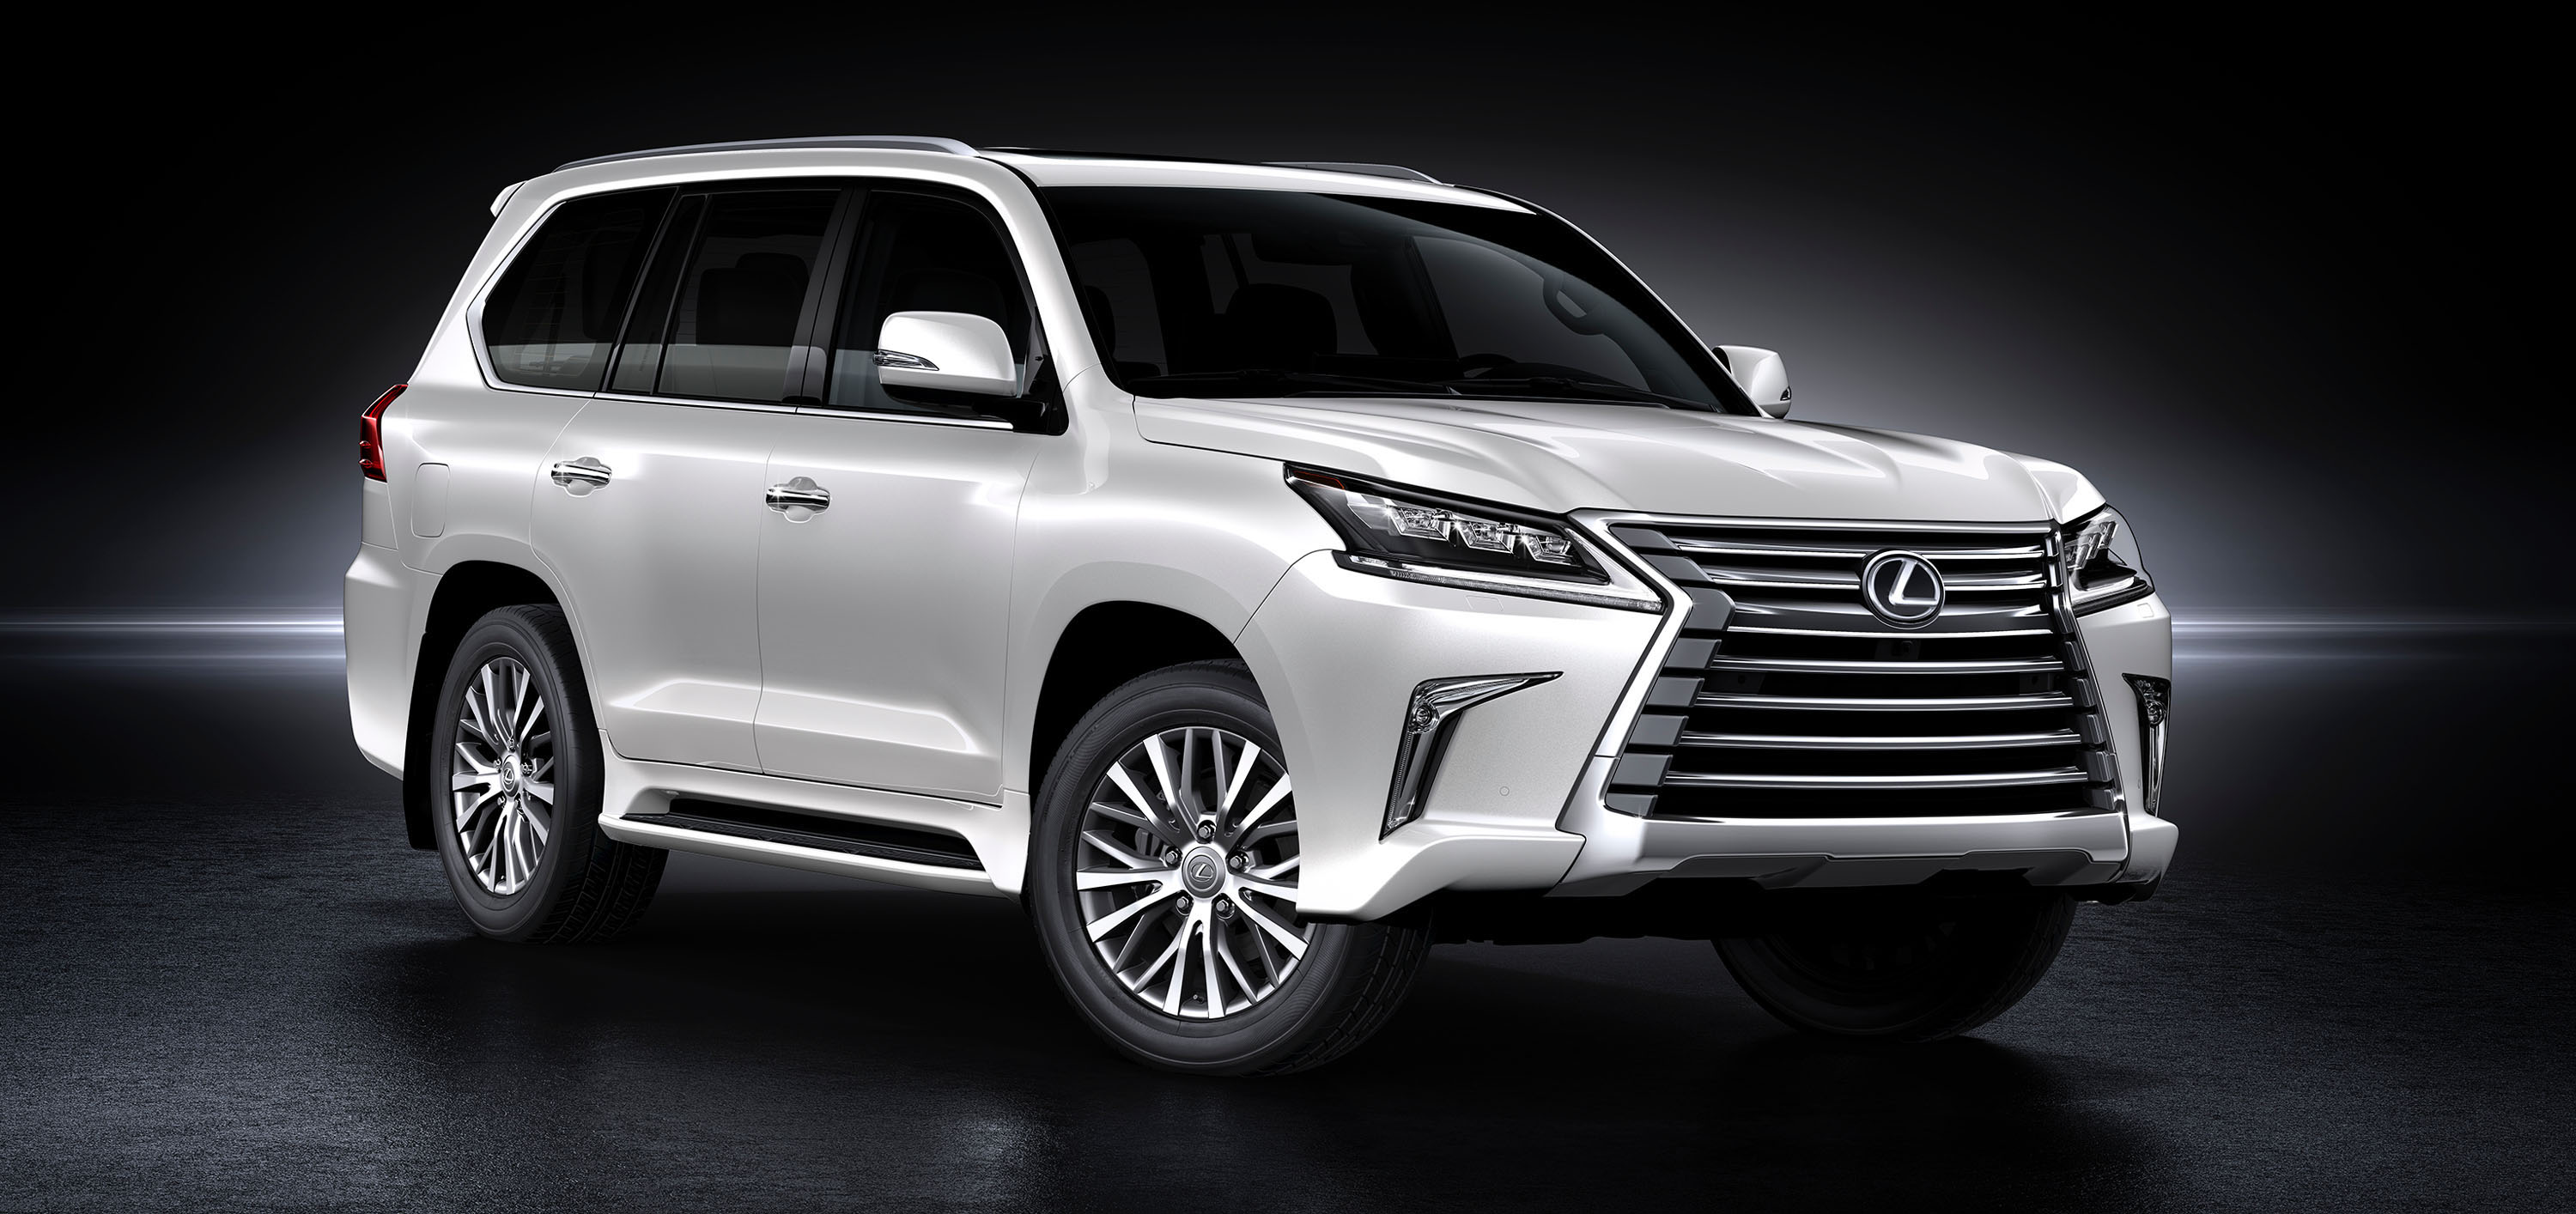 Making a Classic Entrance: Lexus Debuts Refreshed 2016 LX 570 Luxury  Utility Vehicle at Pebble Beach Concours d? Elegance - Lexus USA Newsroom